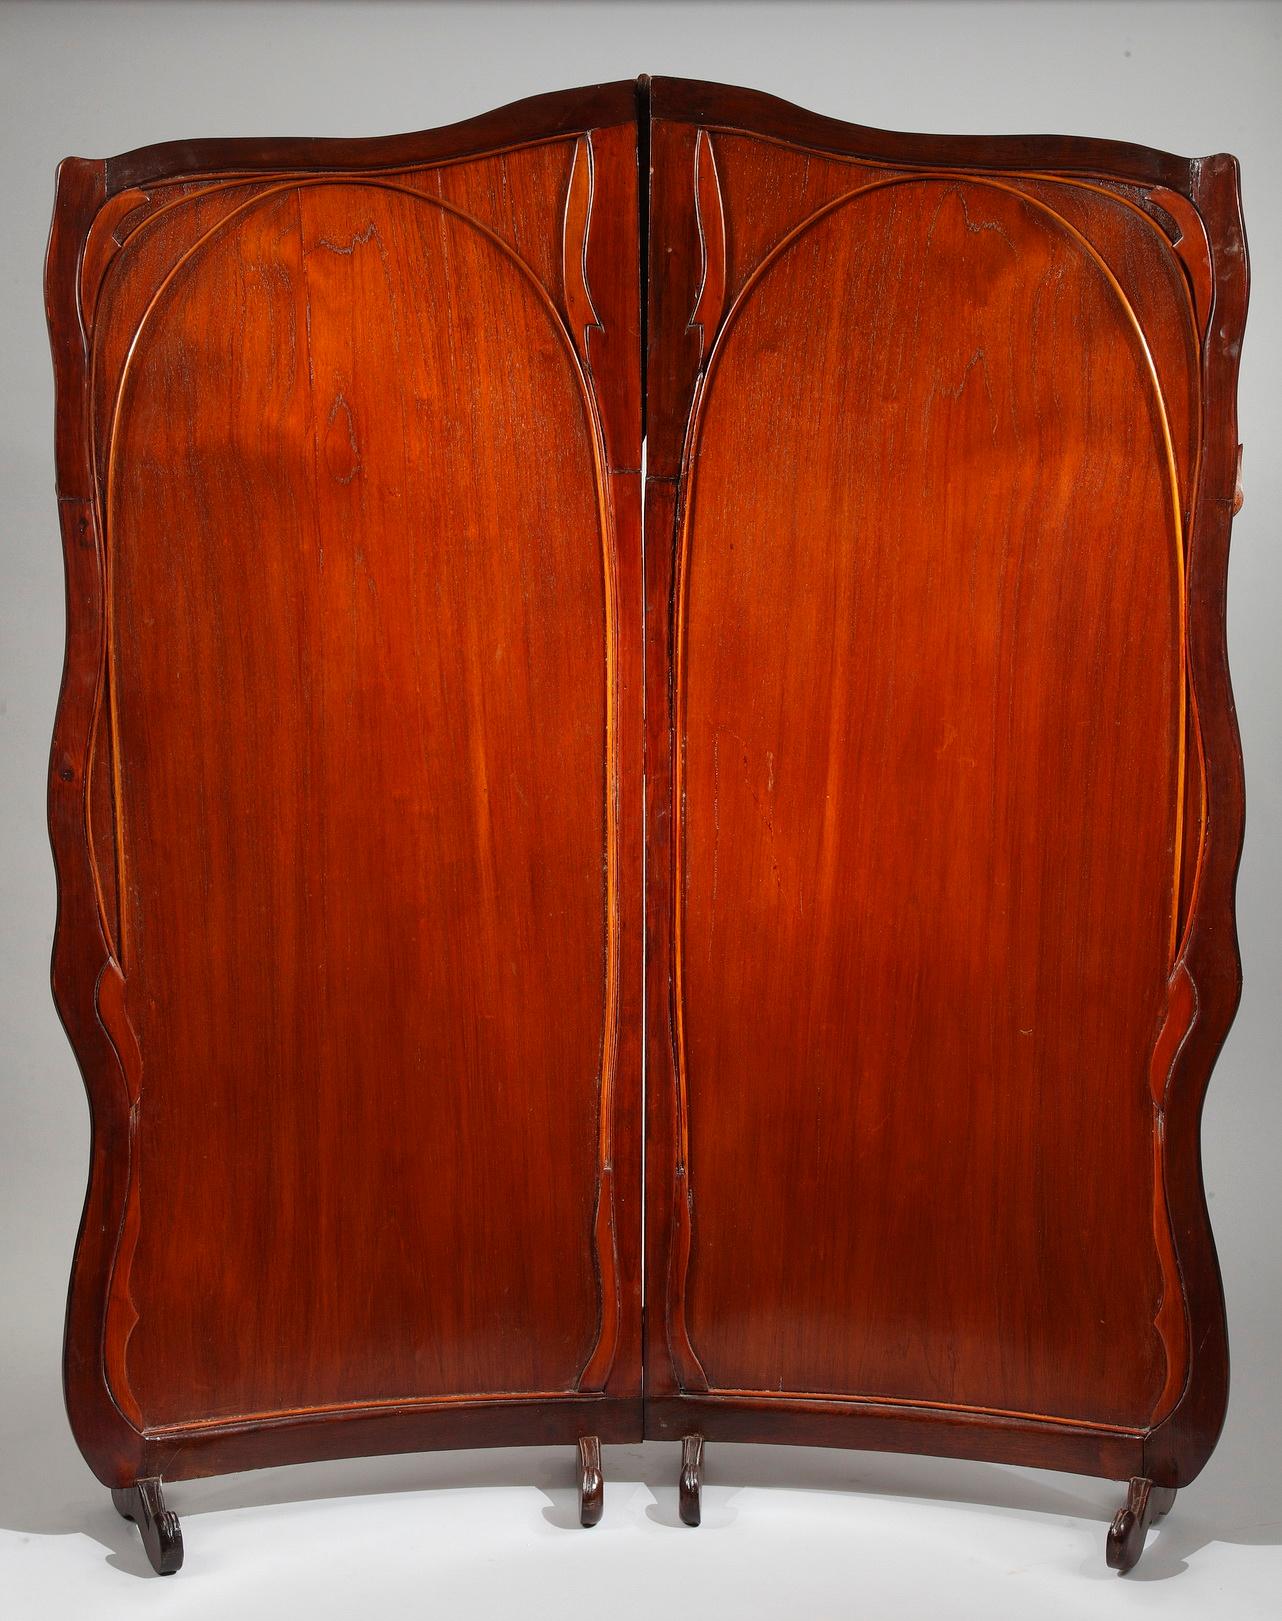 Rare screen composed of two scrolled panels resting on four foot pads.
The rich ornamentation represents wood marquetry aquatic flora, with applied water leaves.
A brass monogram is embedded in the wood marquetry, on the bottom right of the screen.